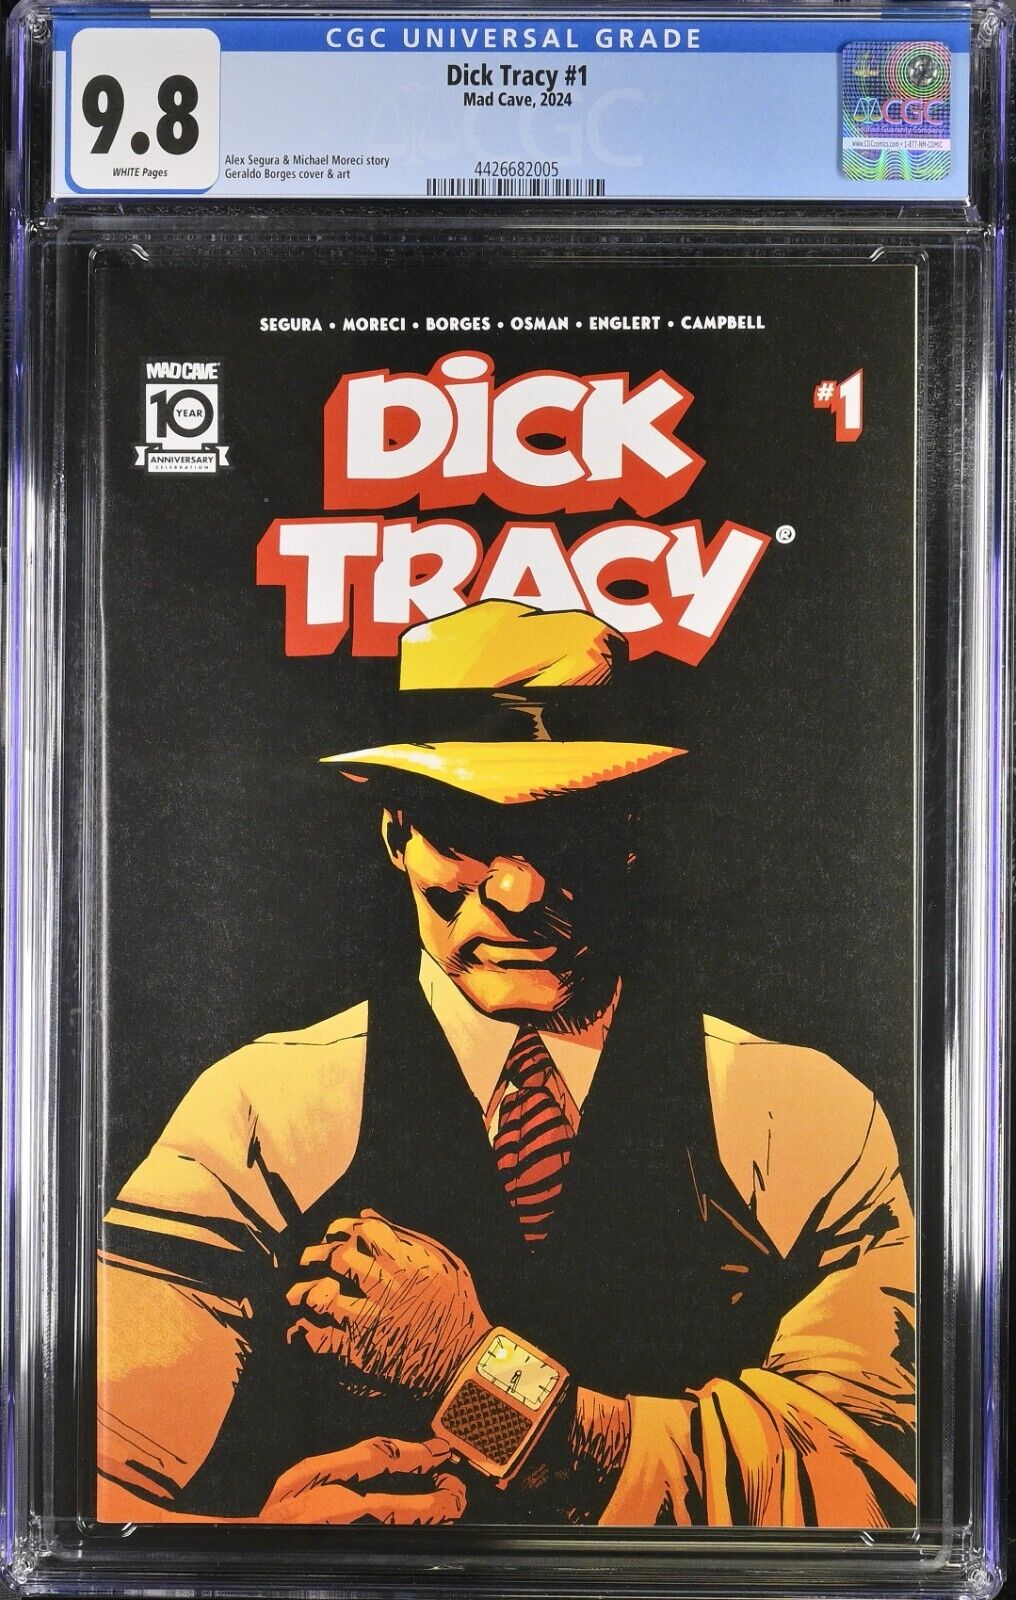 Dick Tracy #1 CGC 9.8 1st Printing Cover A Mad Cave Begins Publishing 2024 WP